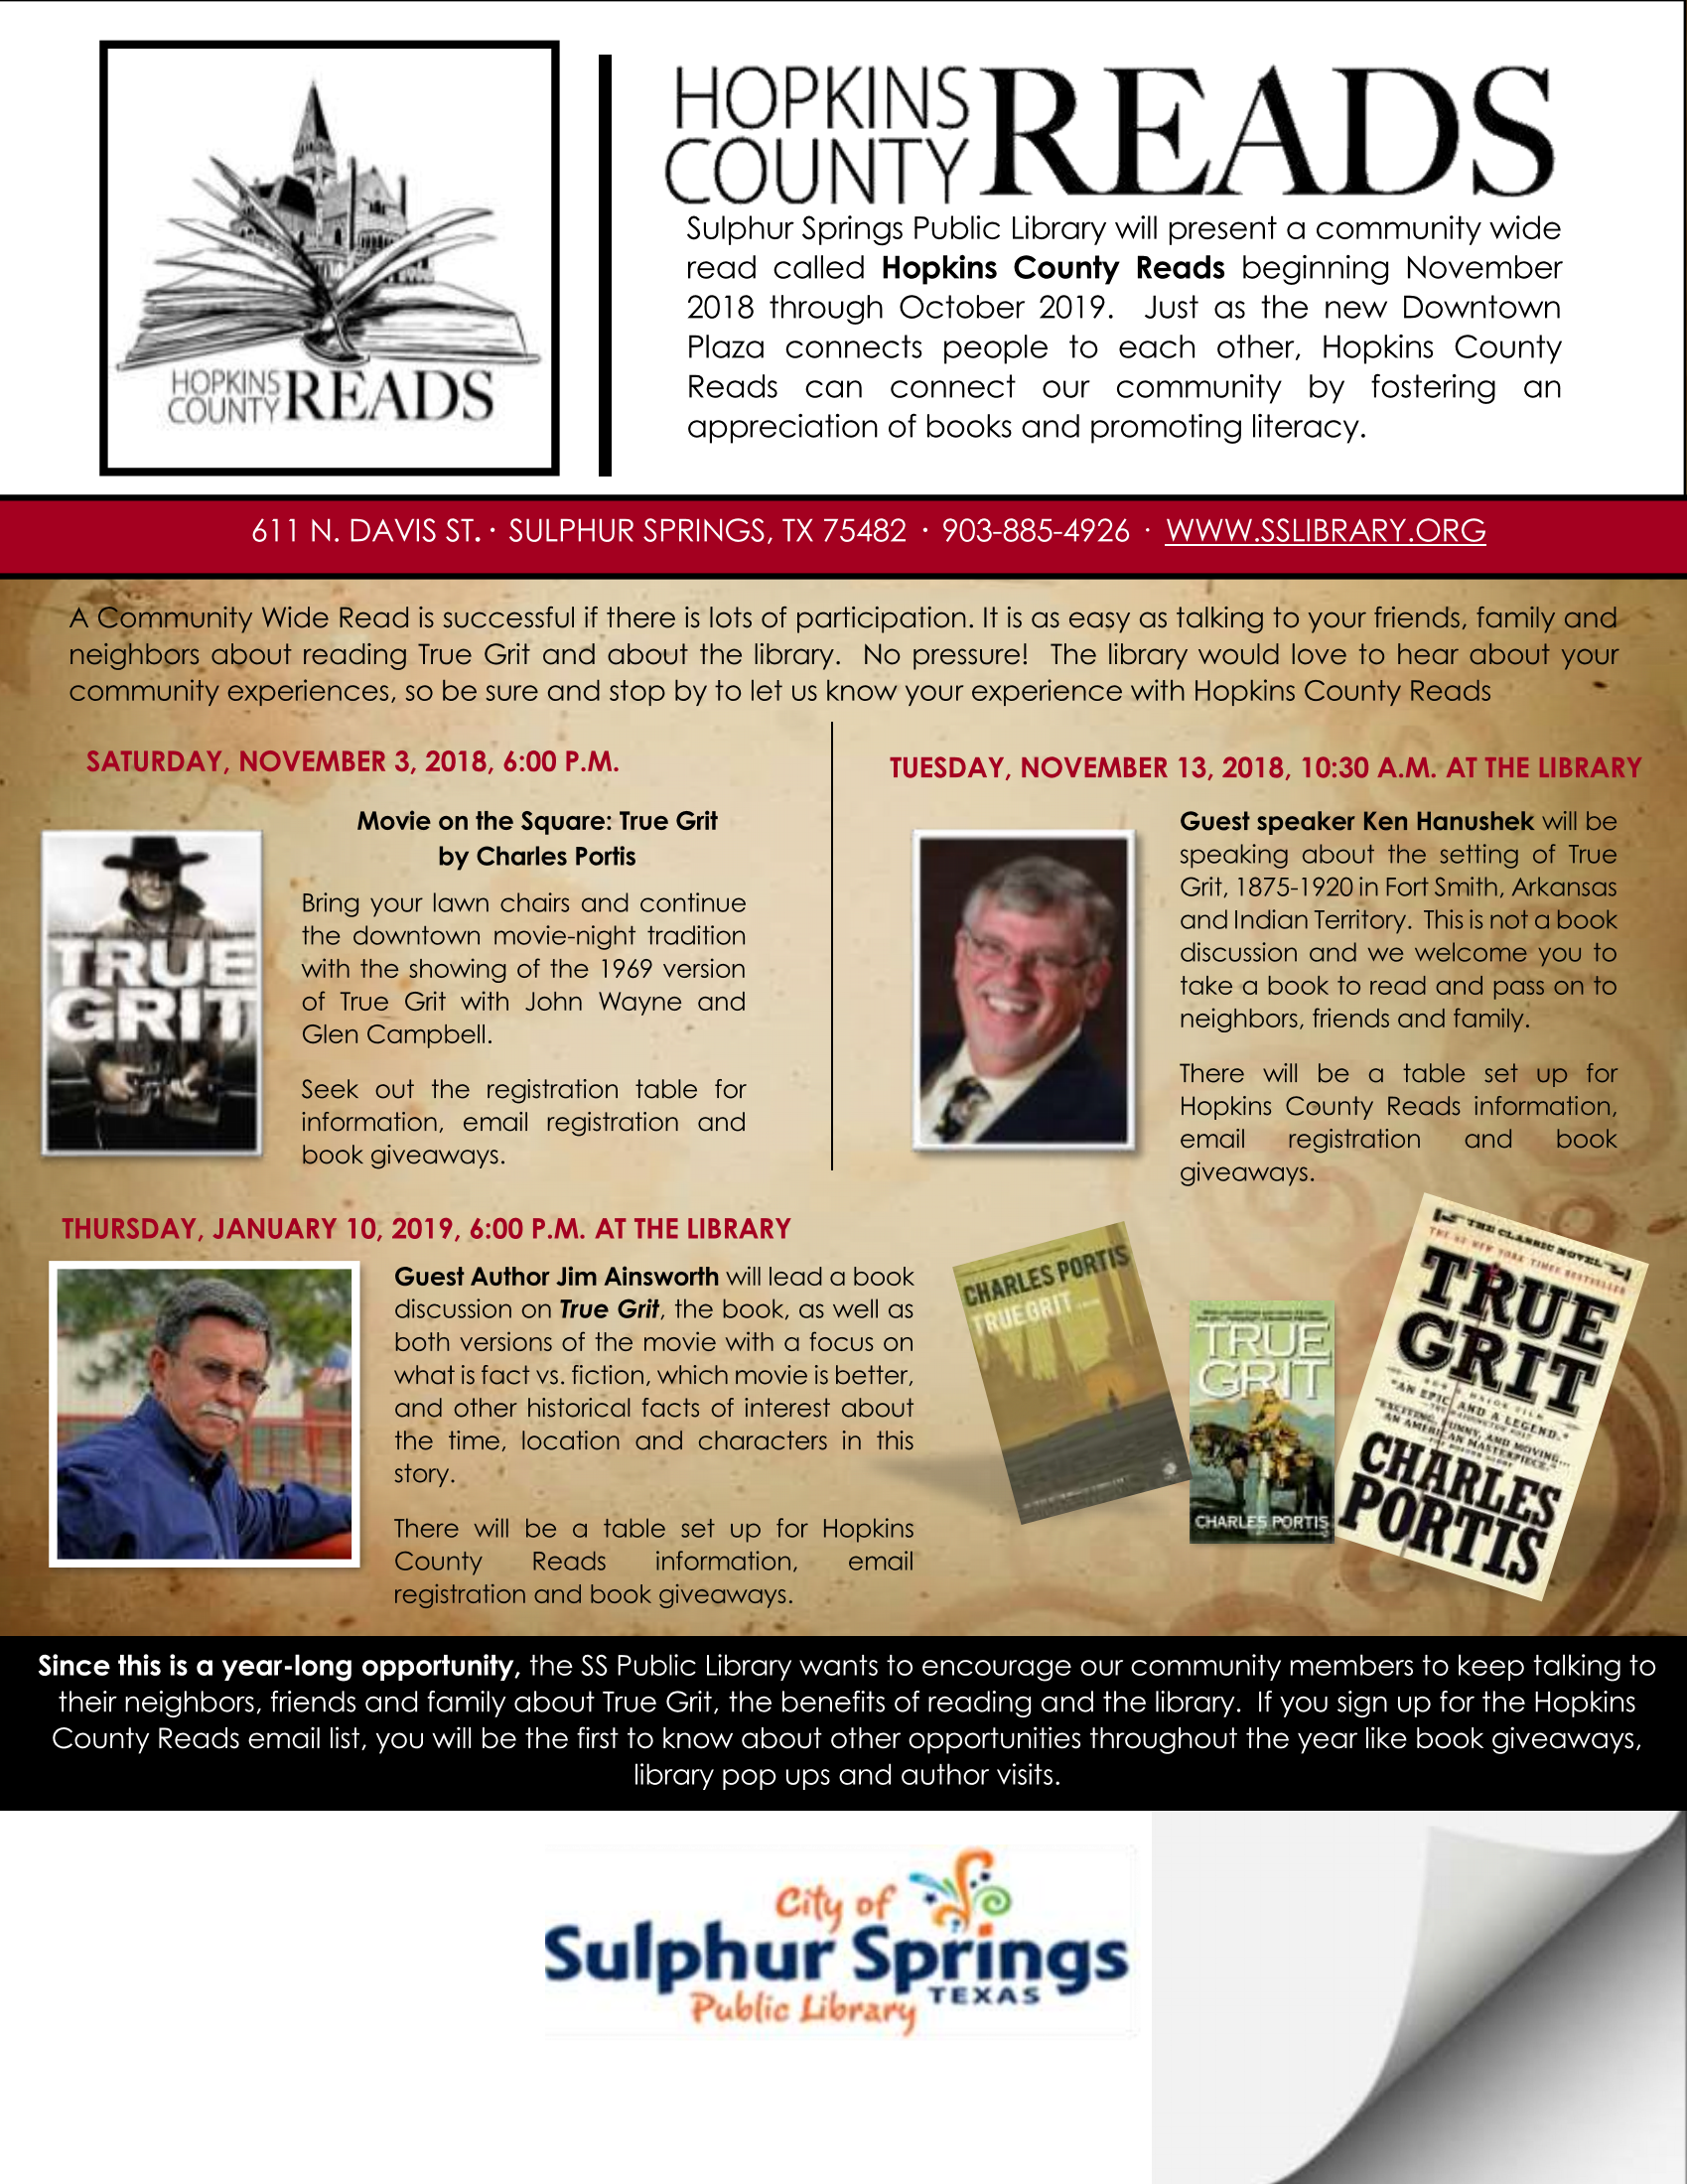 Sulphur Springs Public Library Hosting “True Grit” Book Discussion with Author Jim Ainsworth Next Thursday